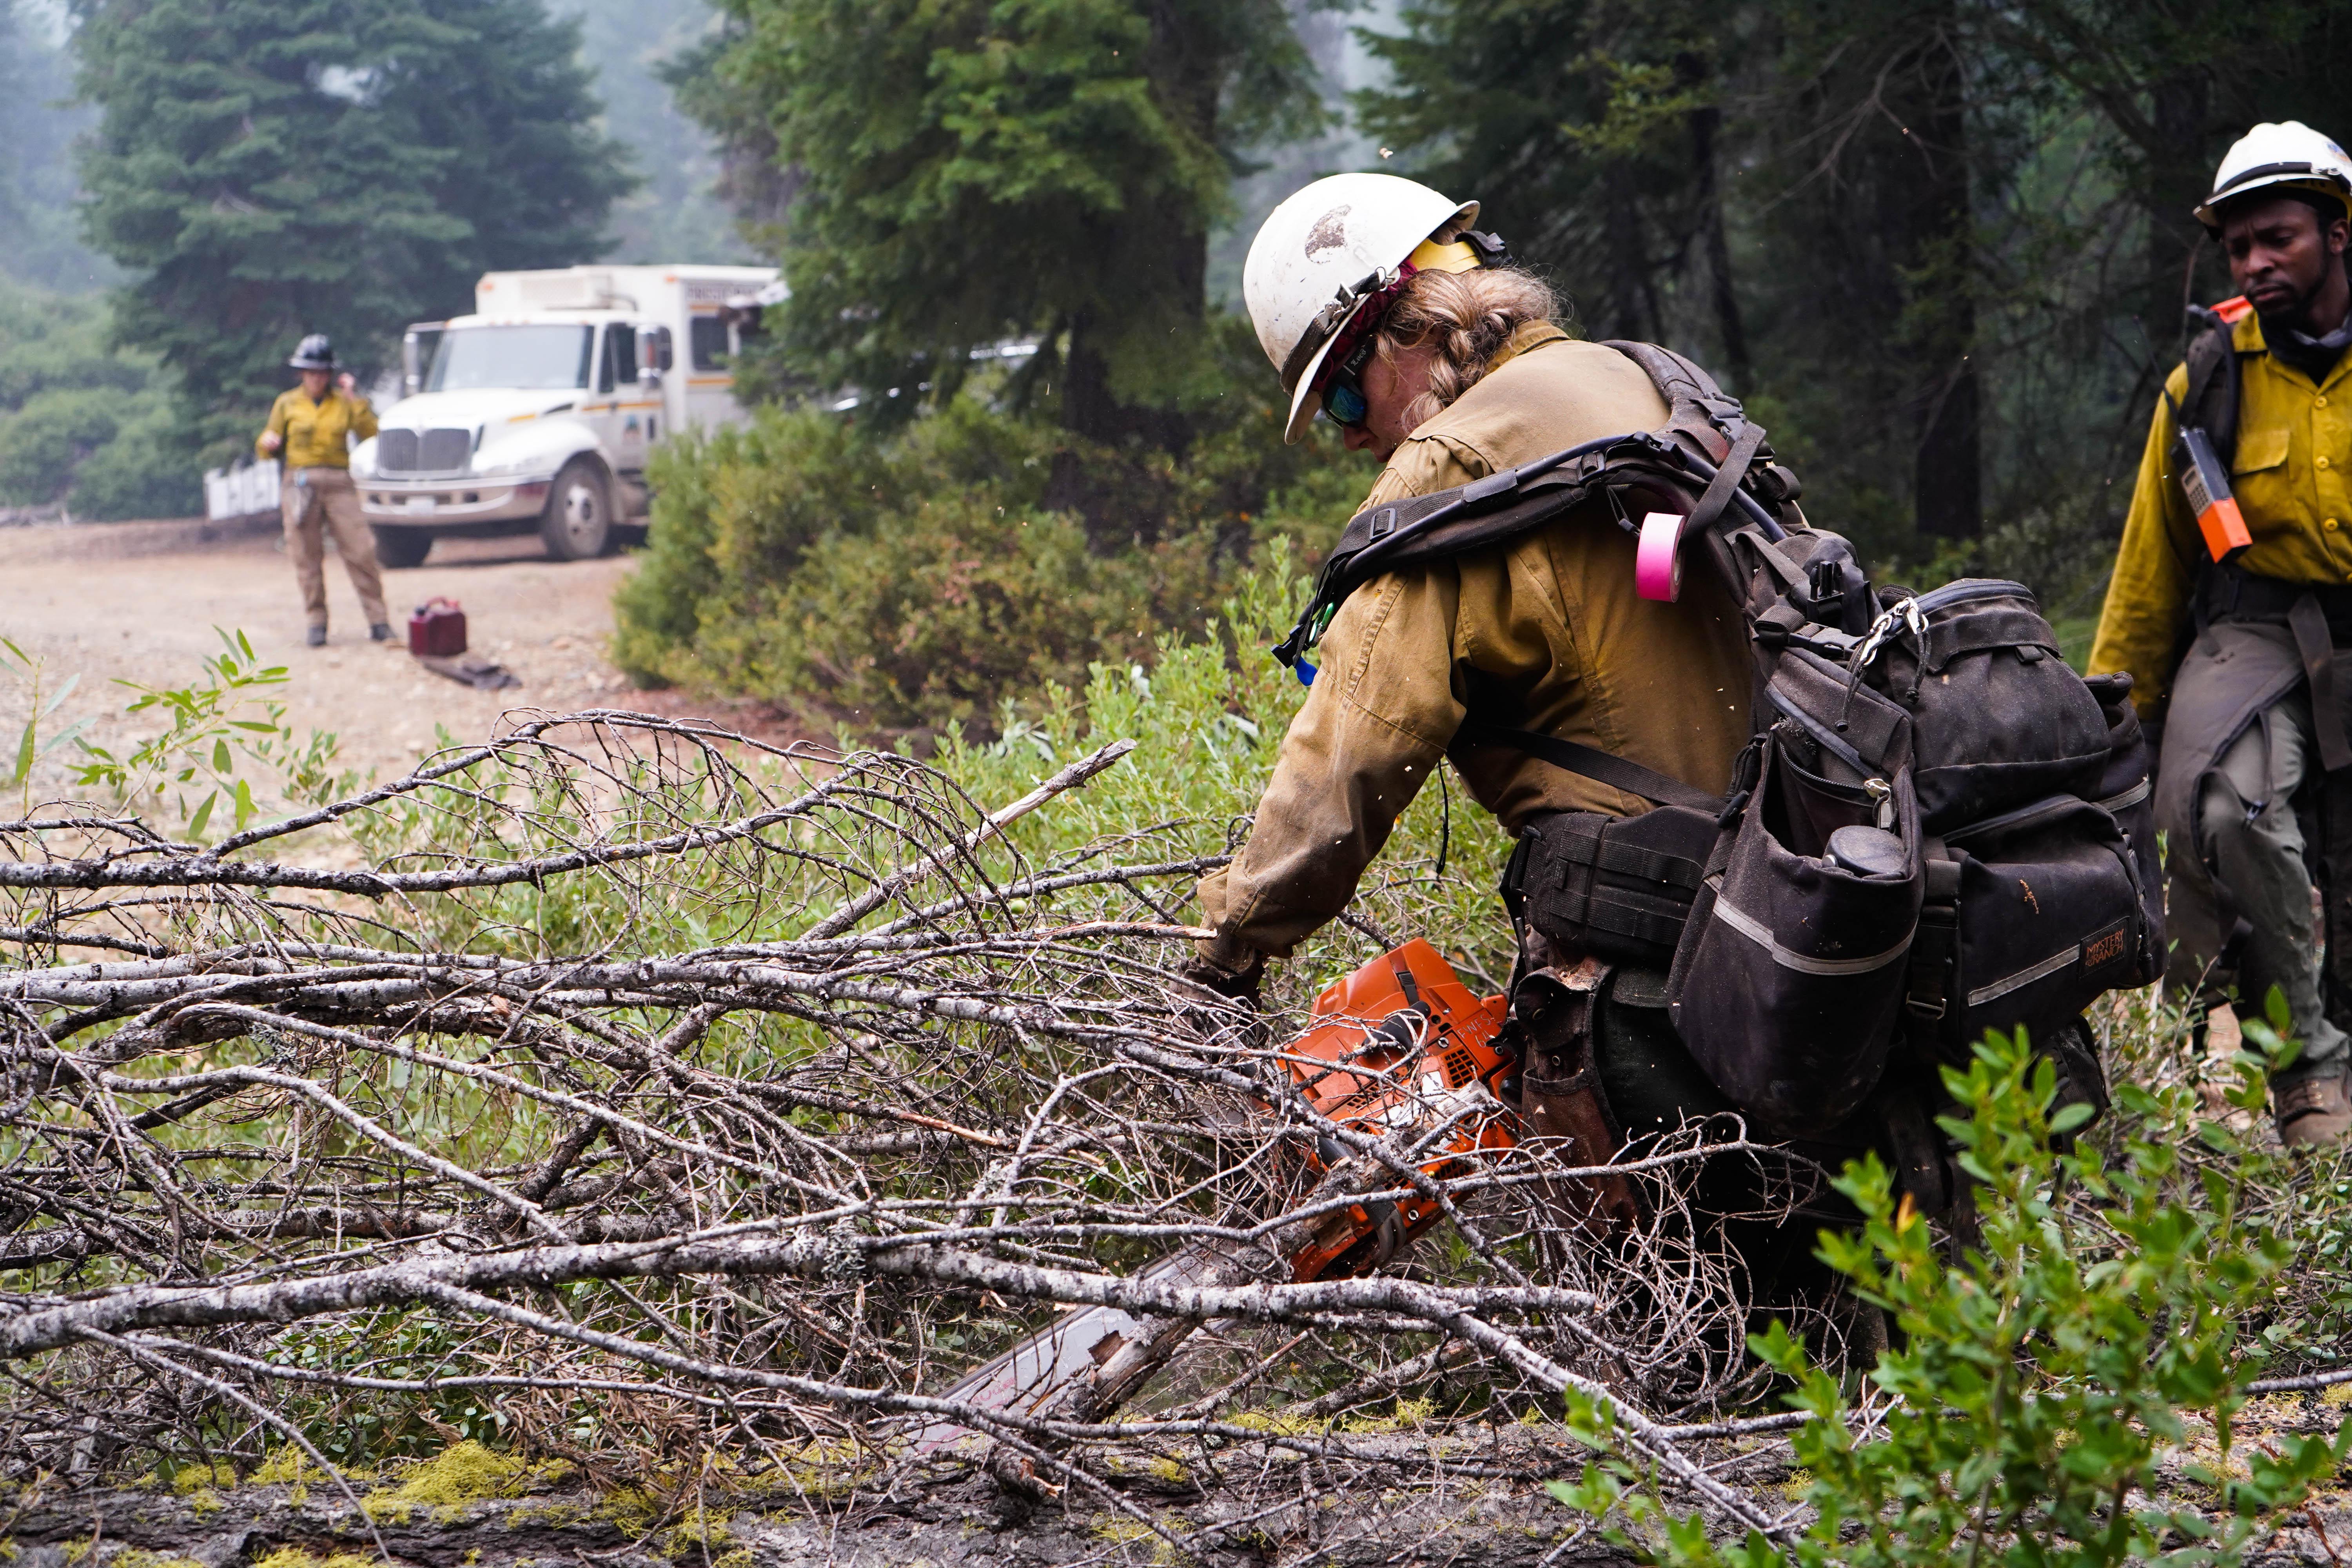 A female firefighter used a chainsaw to clear brush.